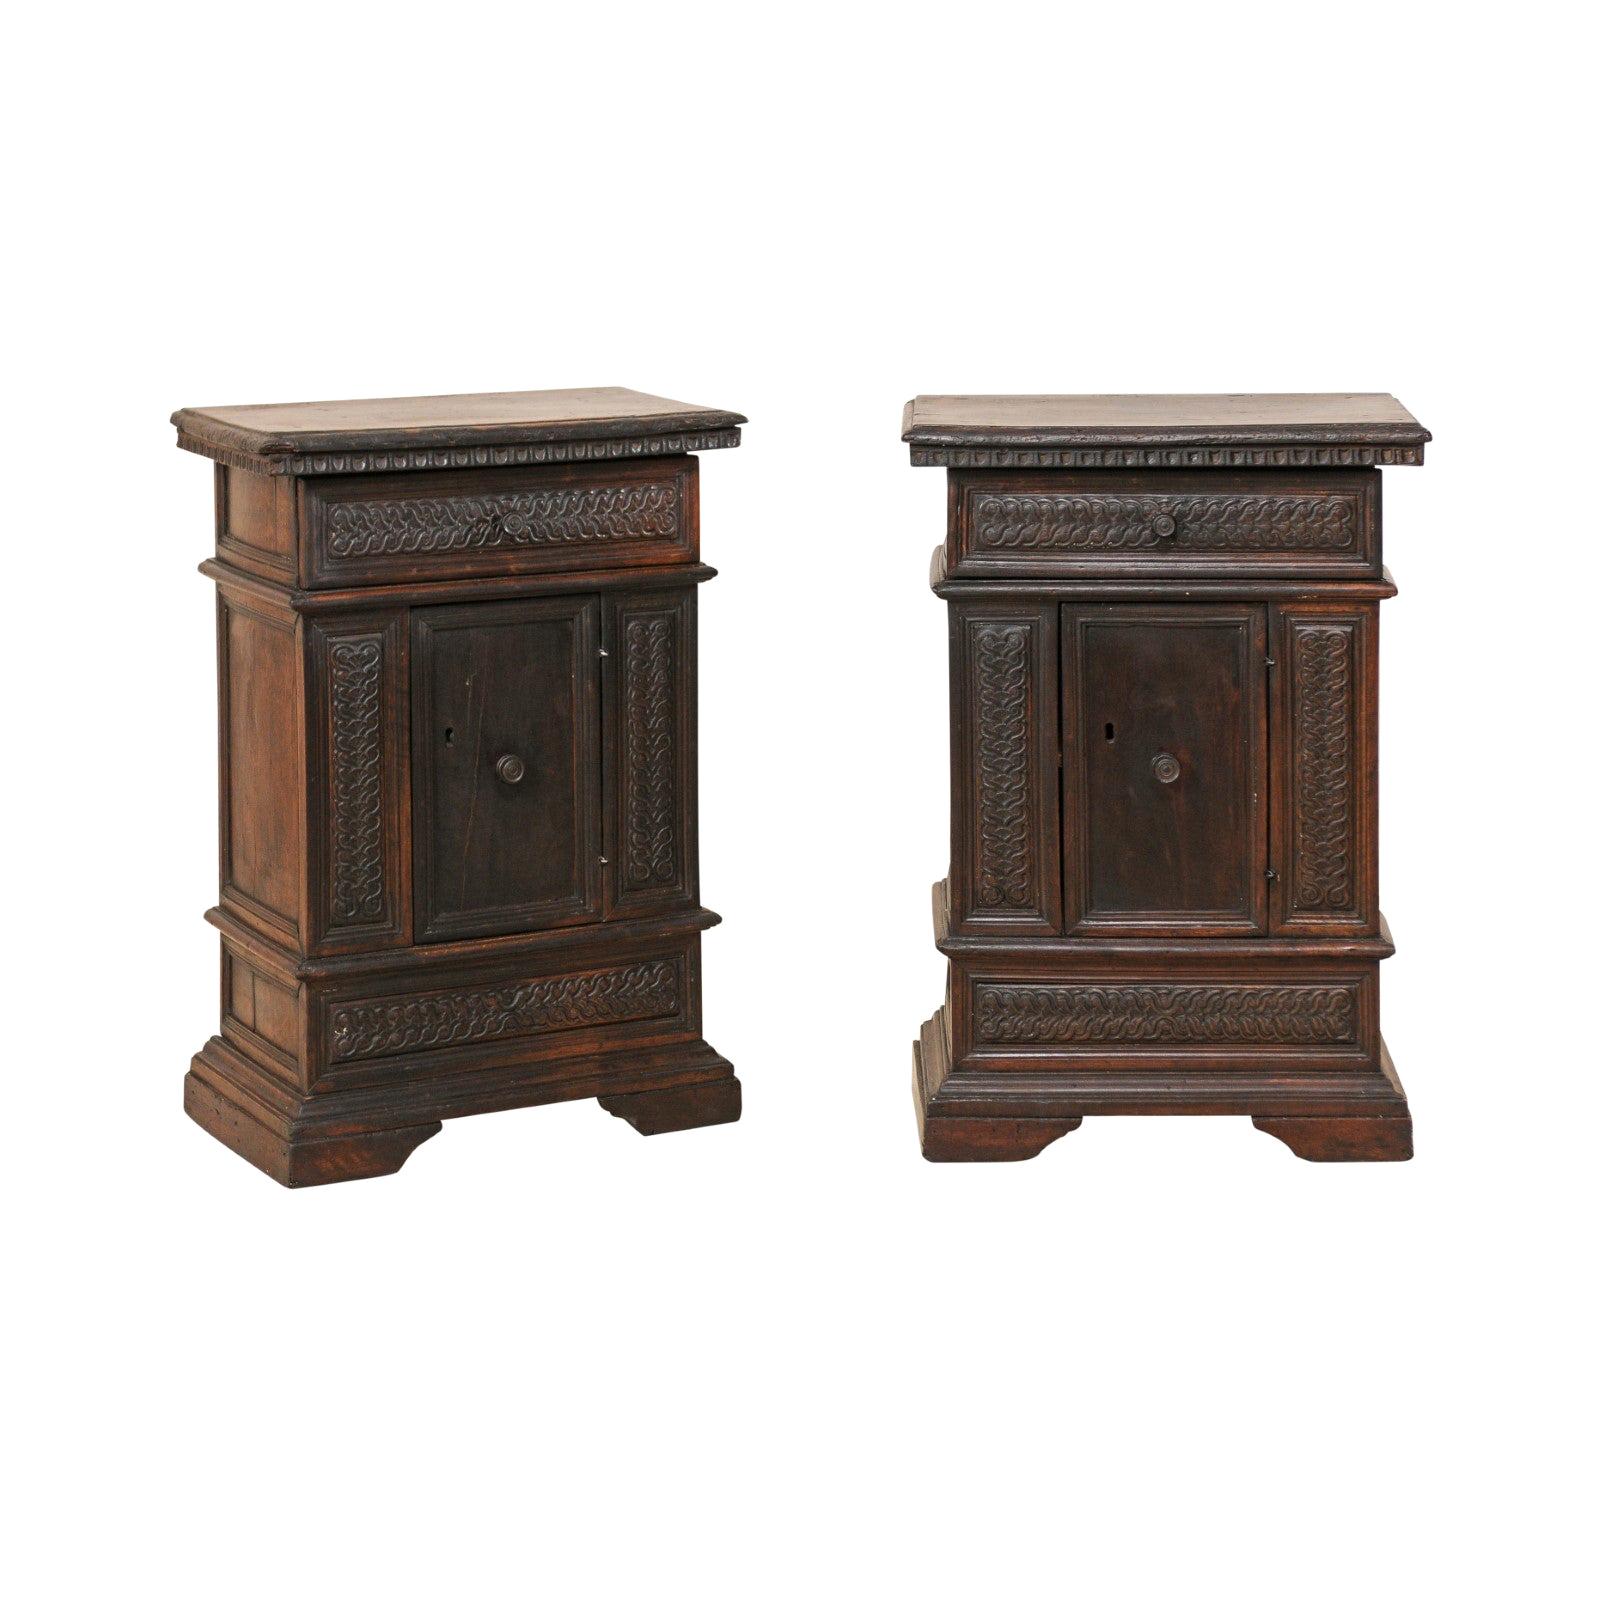 An Italian Pair of Small-Sized 18th C. Carved-Walnut Side Chests or Nightstands